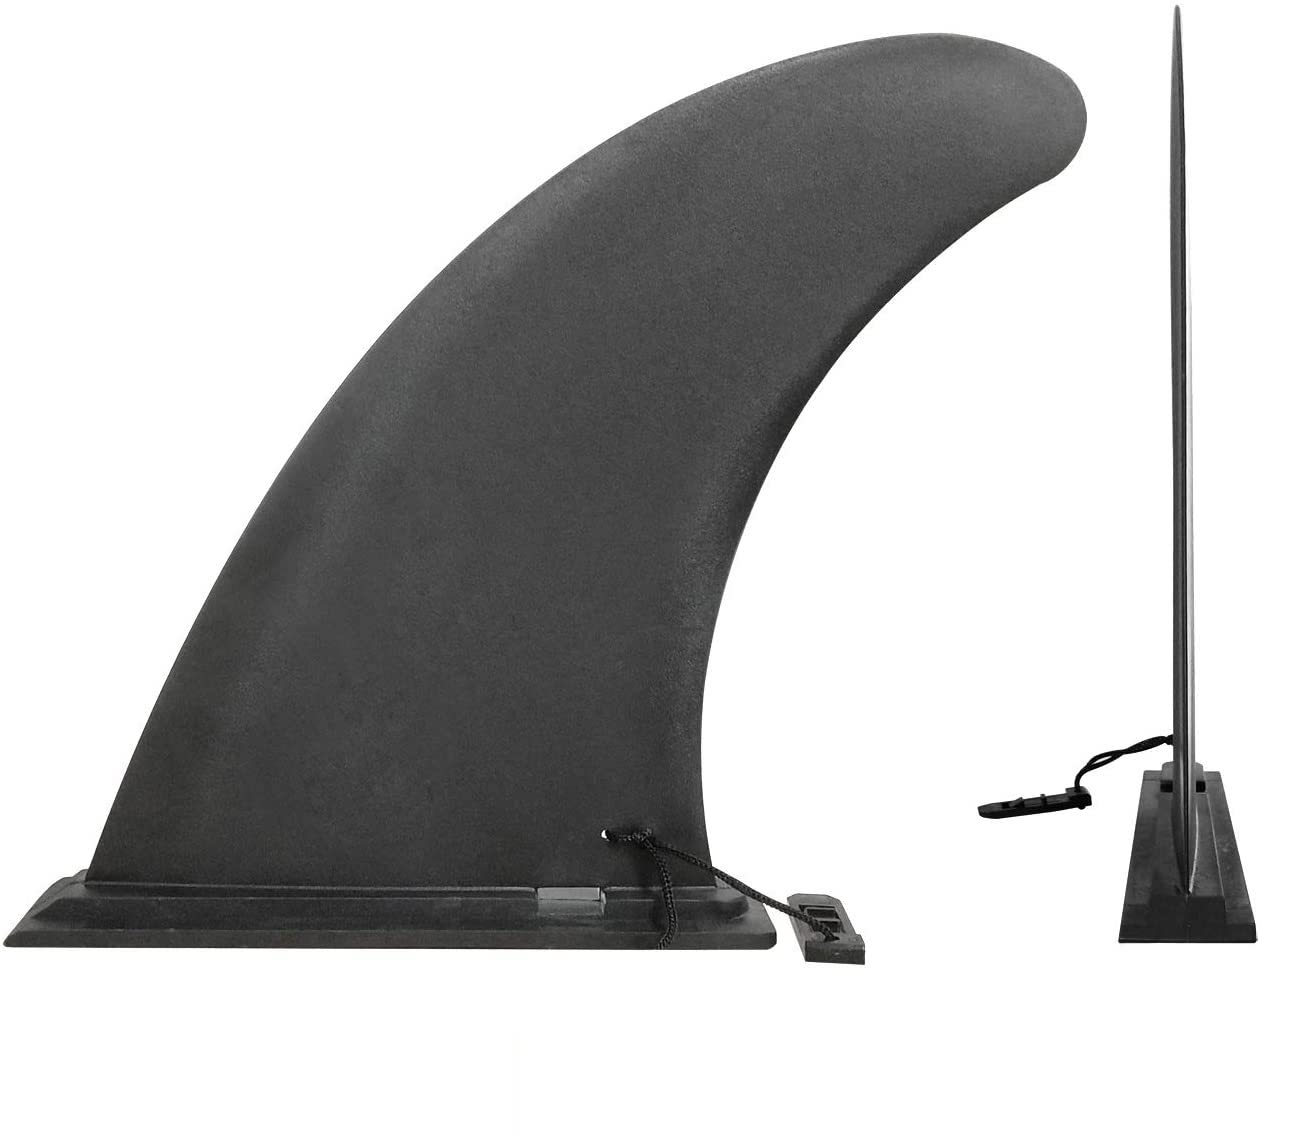 SUP Detachable Center Fin - The Paddle Co.